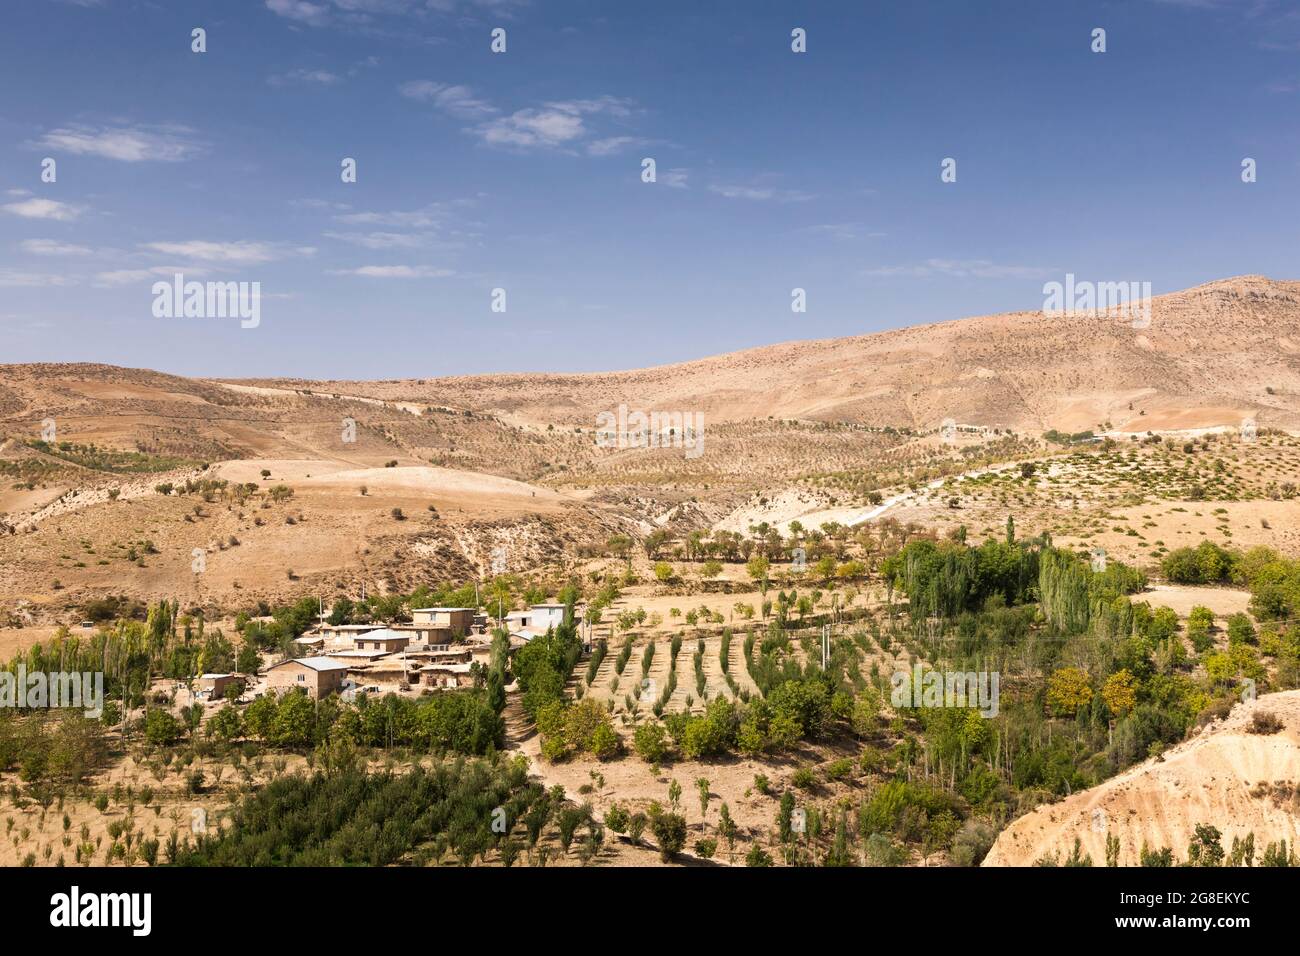 View of agricultural fields and local village in highland valley, Zagros mountains, Mambalu, Fars Province, Iran, Persia, Western Asia, Asia Stock Photo